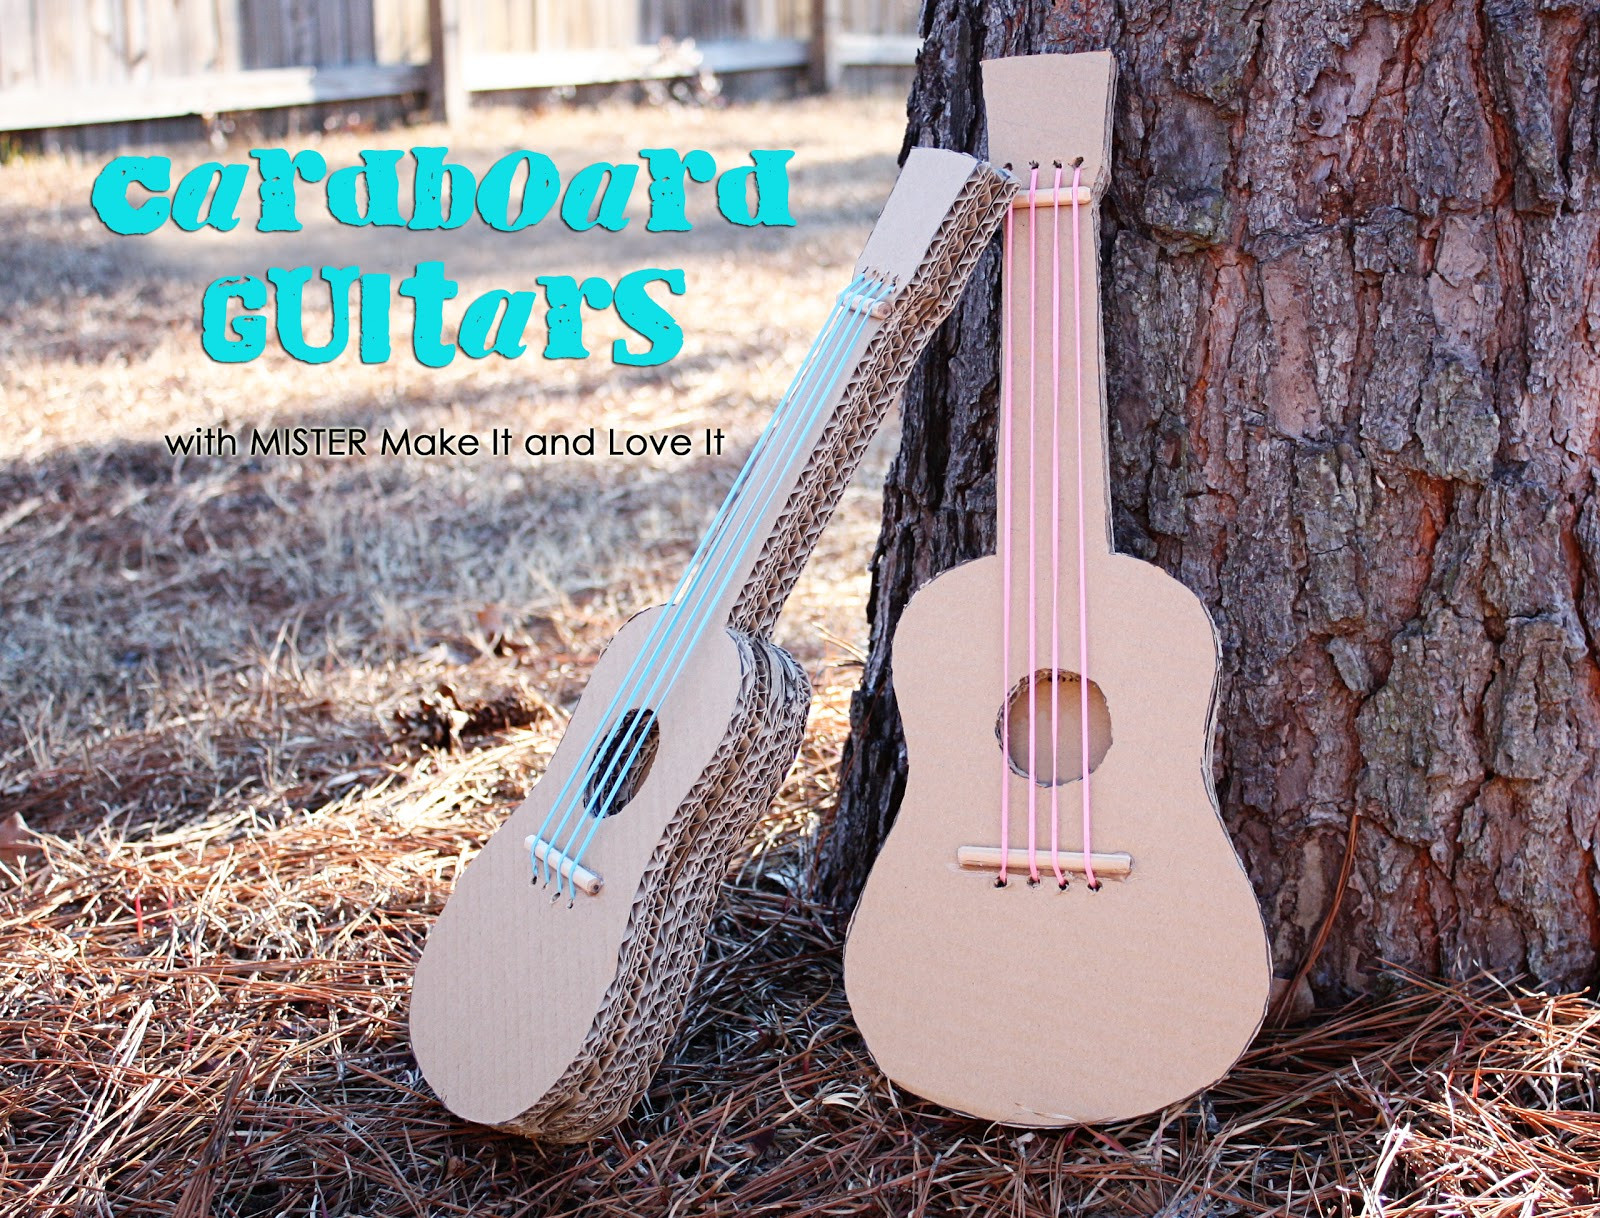 DIY Guitar For Kids
 The MISTER Make It and Love It Series Cardboard Guitars